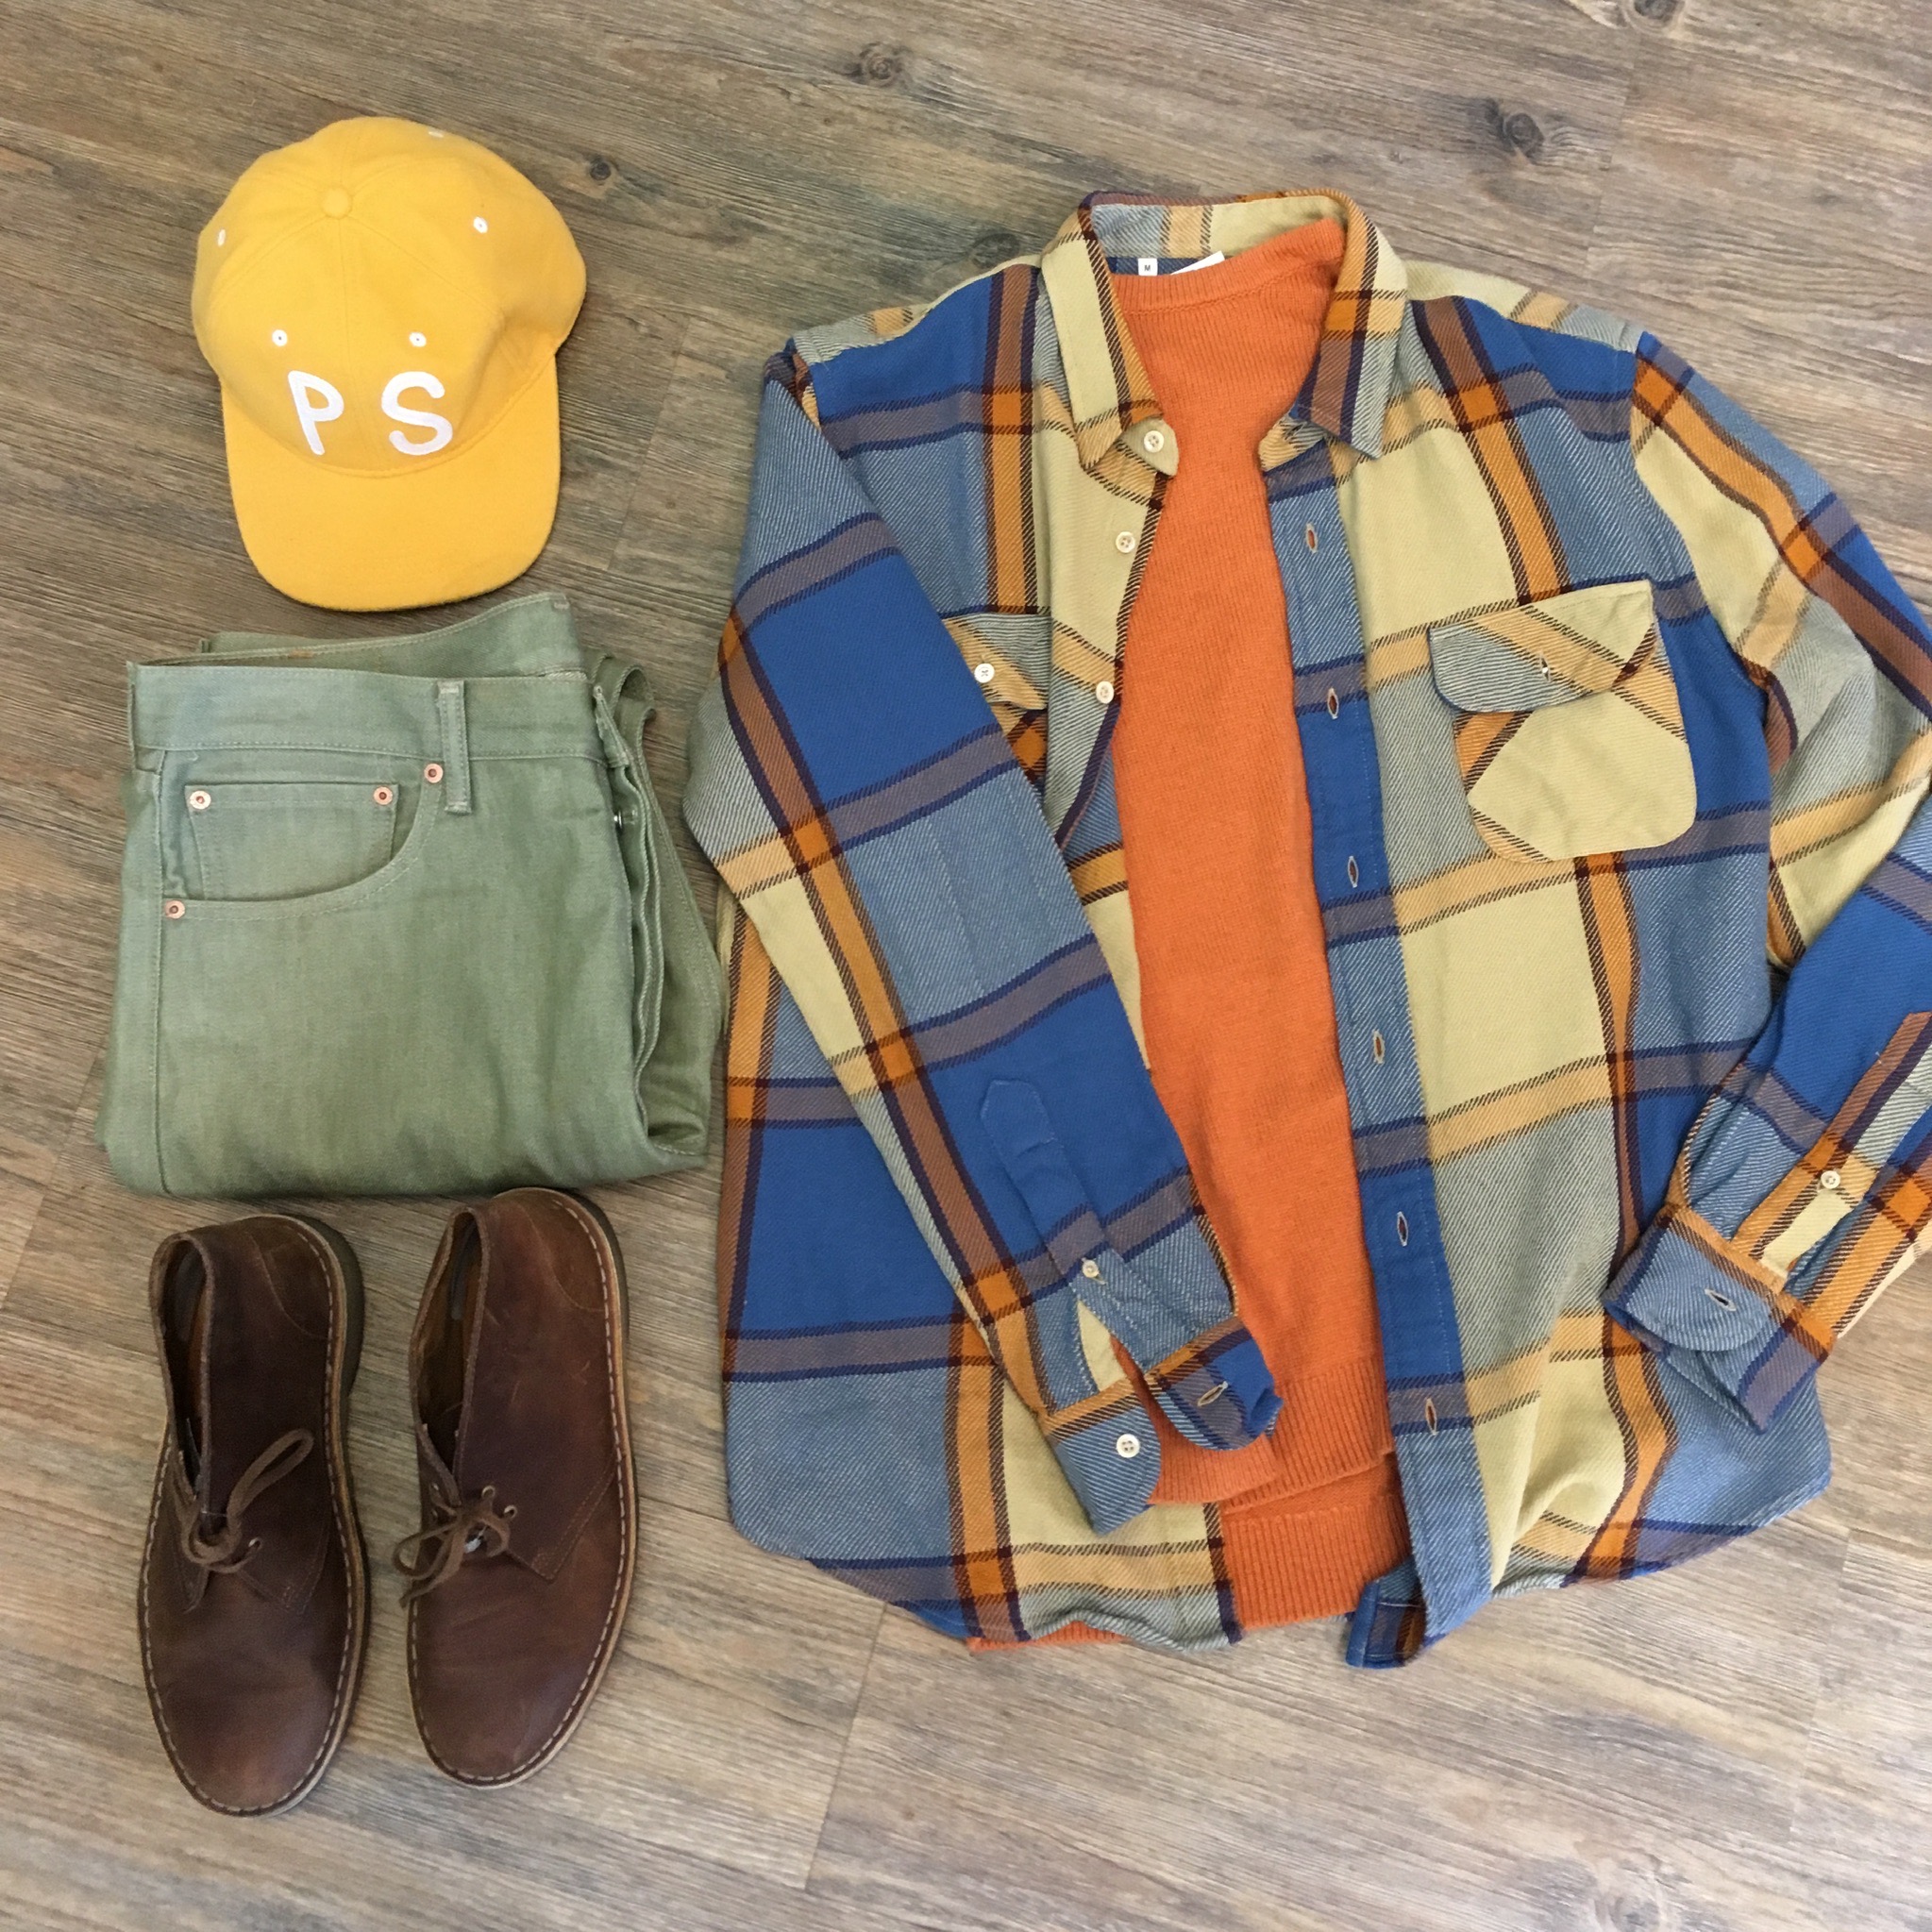 Flat lay of earth tone clothing including yellow ballcap, green jeans, brown suede boots, orange sweater and blue and orange plaid shirt